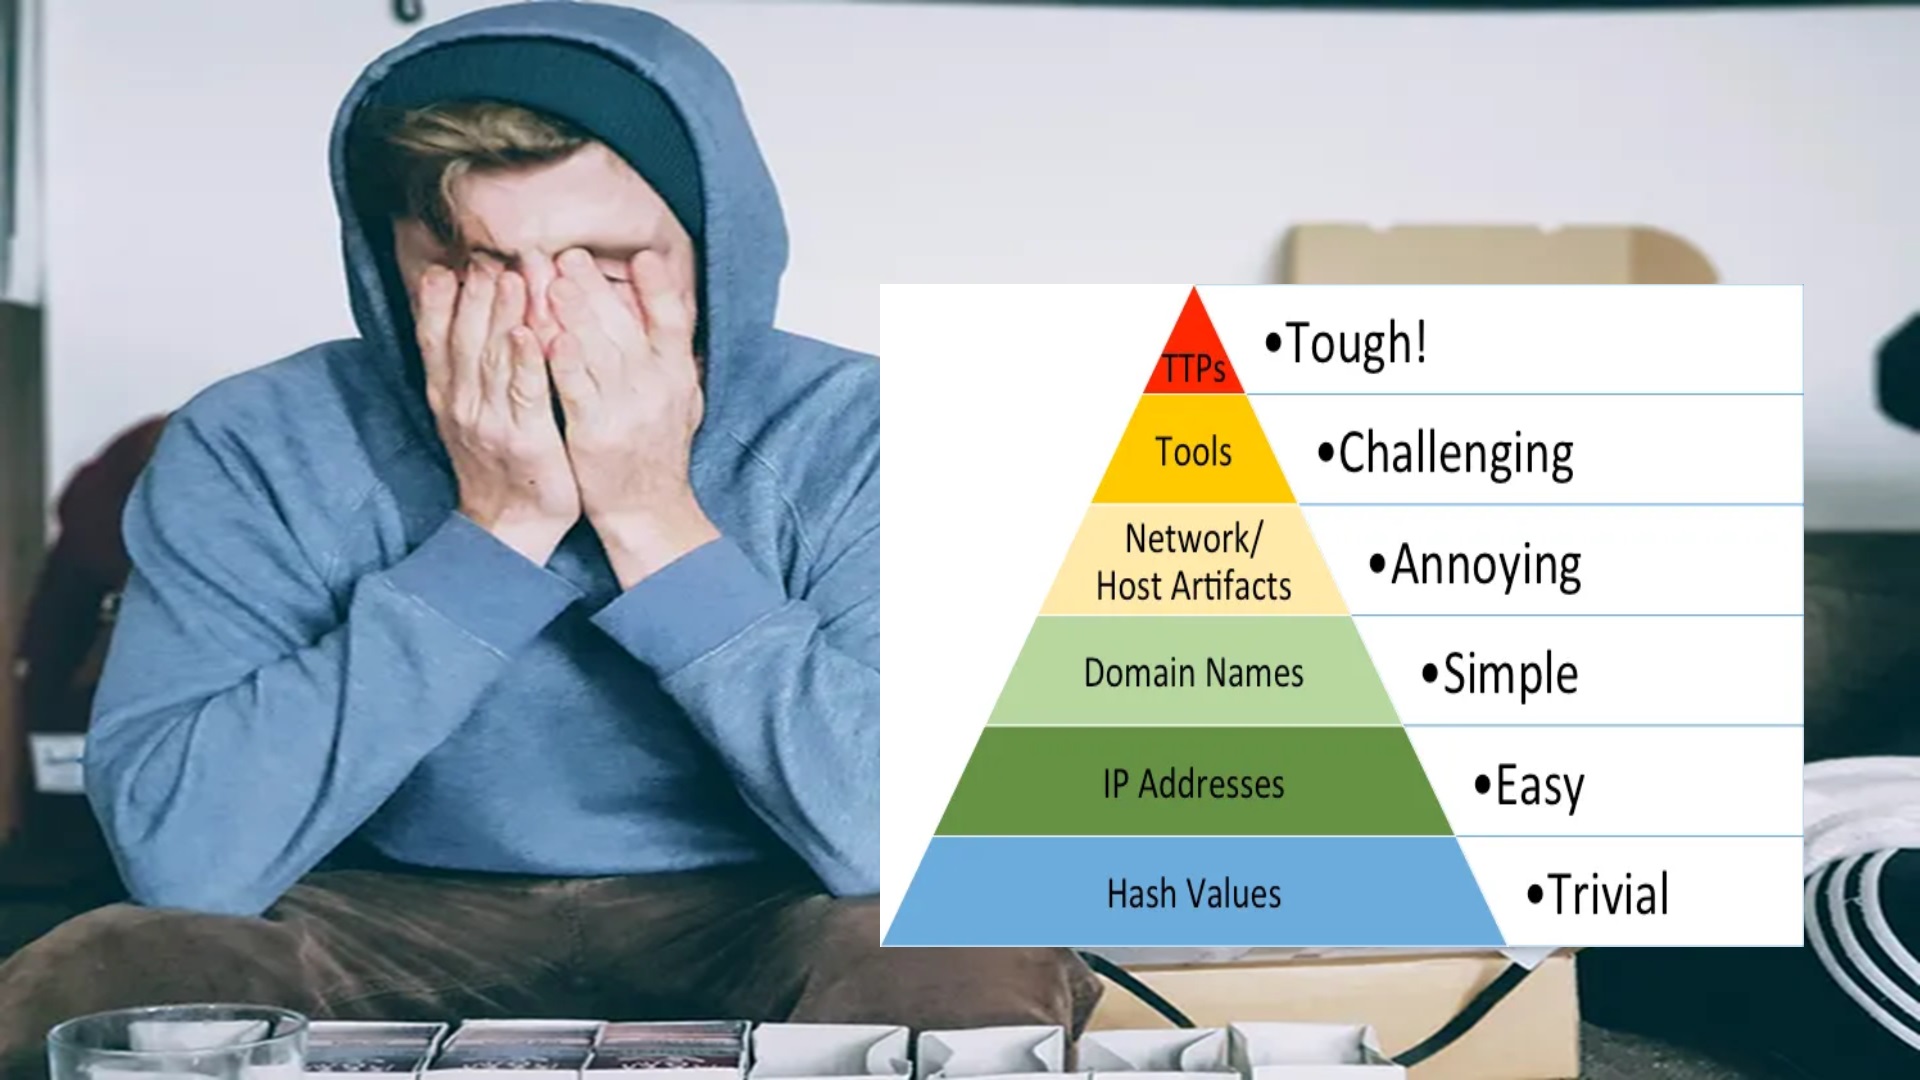 Elevate your Threat Detections using the The Almighty Pyramid of Pain